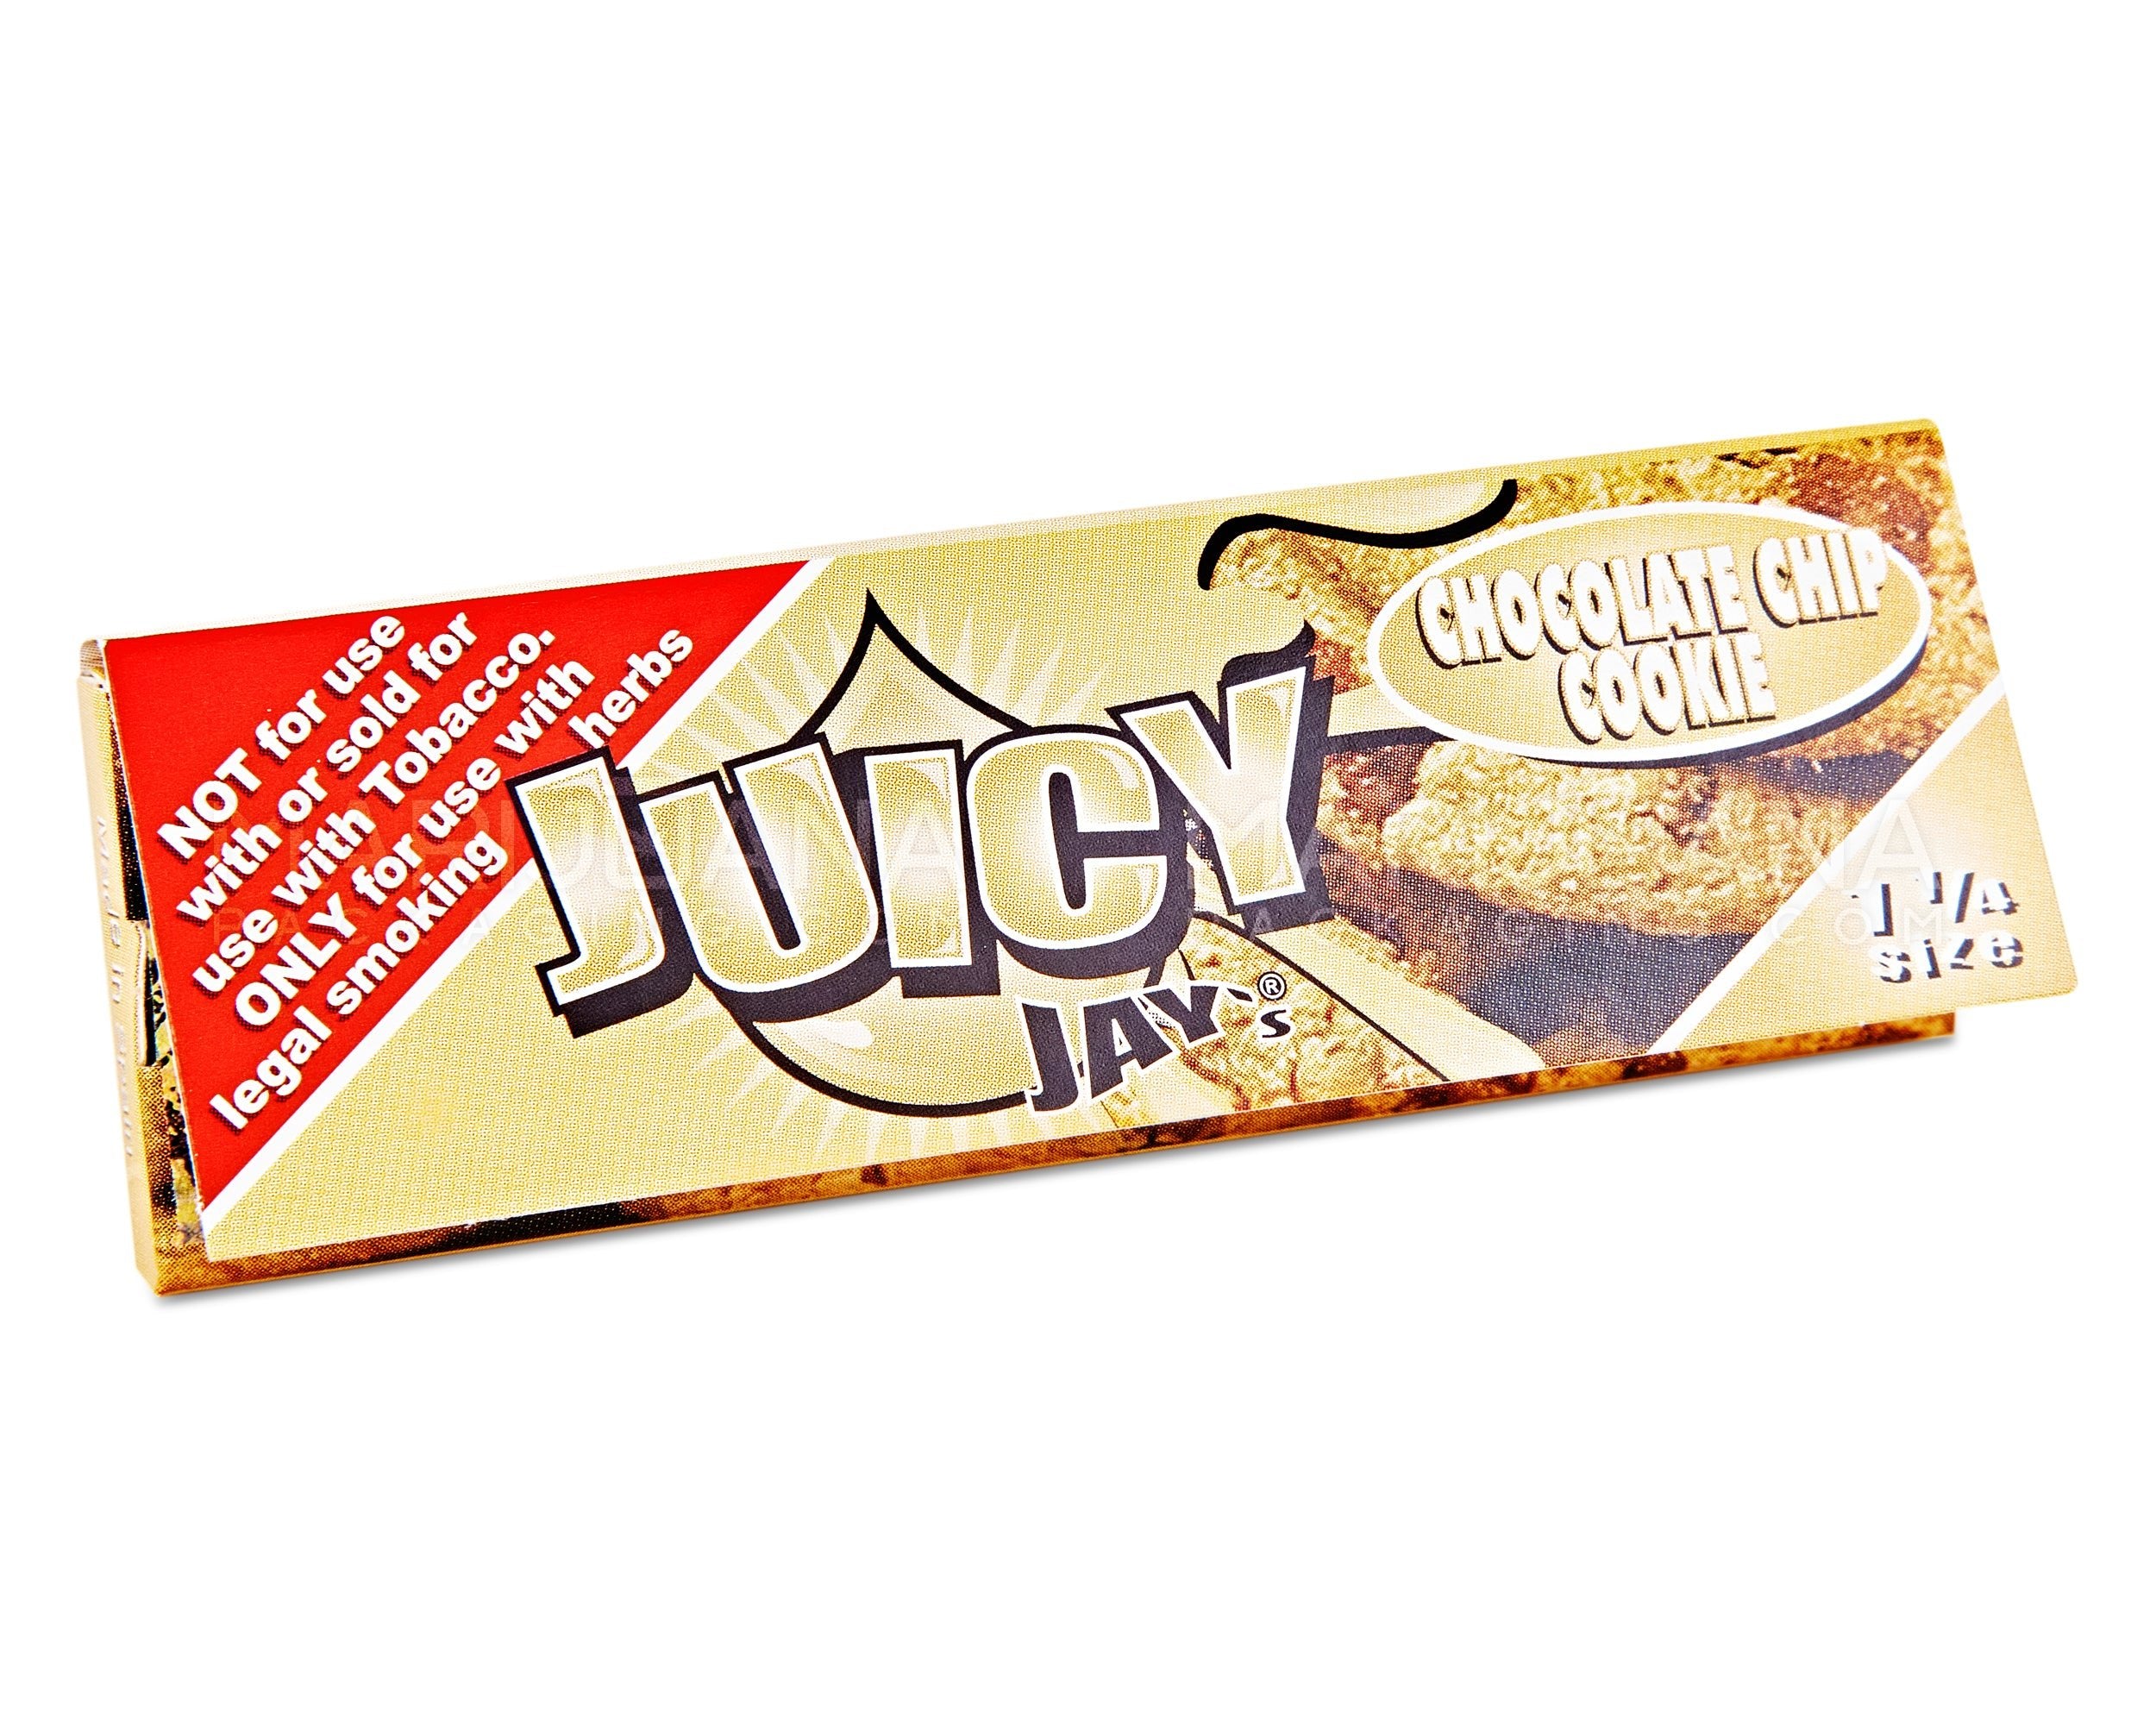 JUICY JAY'S | 'Retail Display' 1 1/4 Size Hemp Rolling Papers | 76mm - Chocolate Chip Cookie - 24 Count - 4